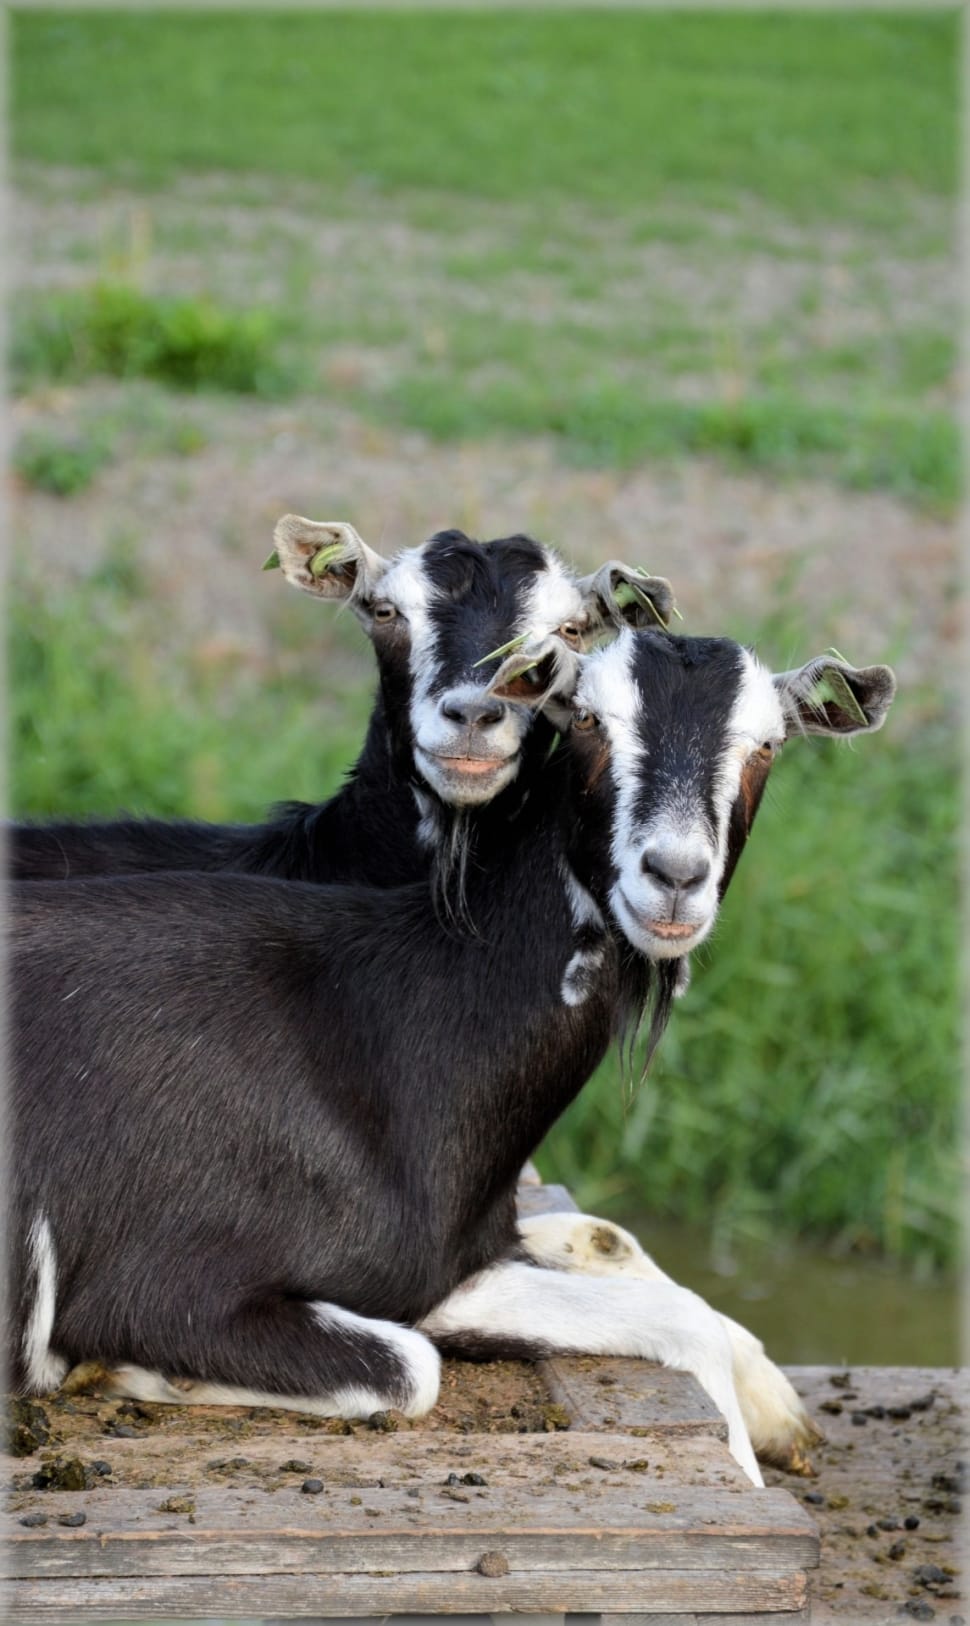 Herd, Goat, Outdoor, Animals, Farm, animal themes, domestic animals preview